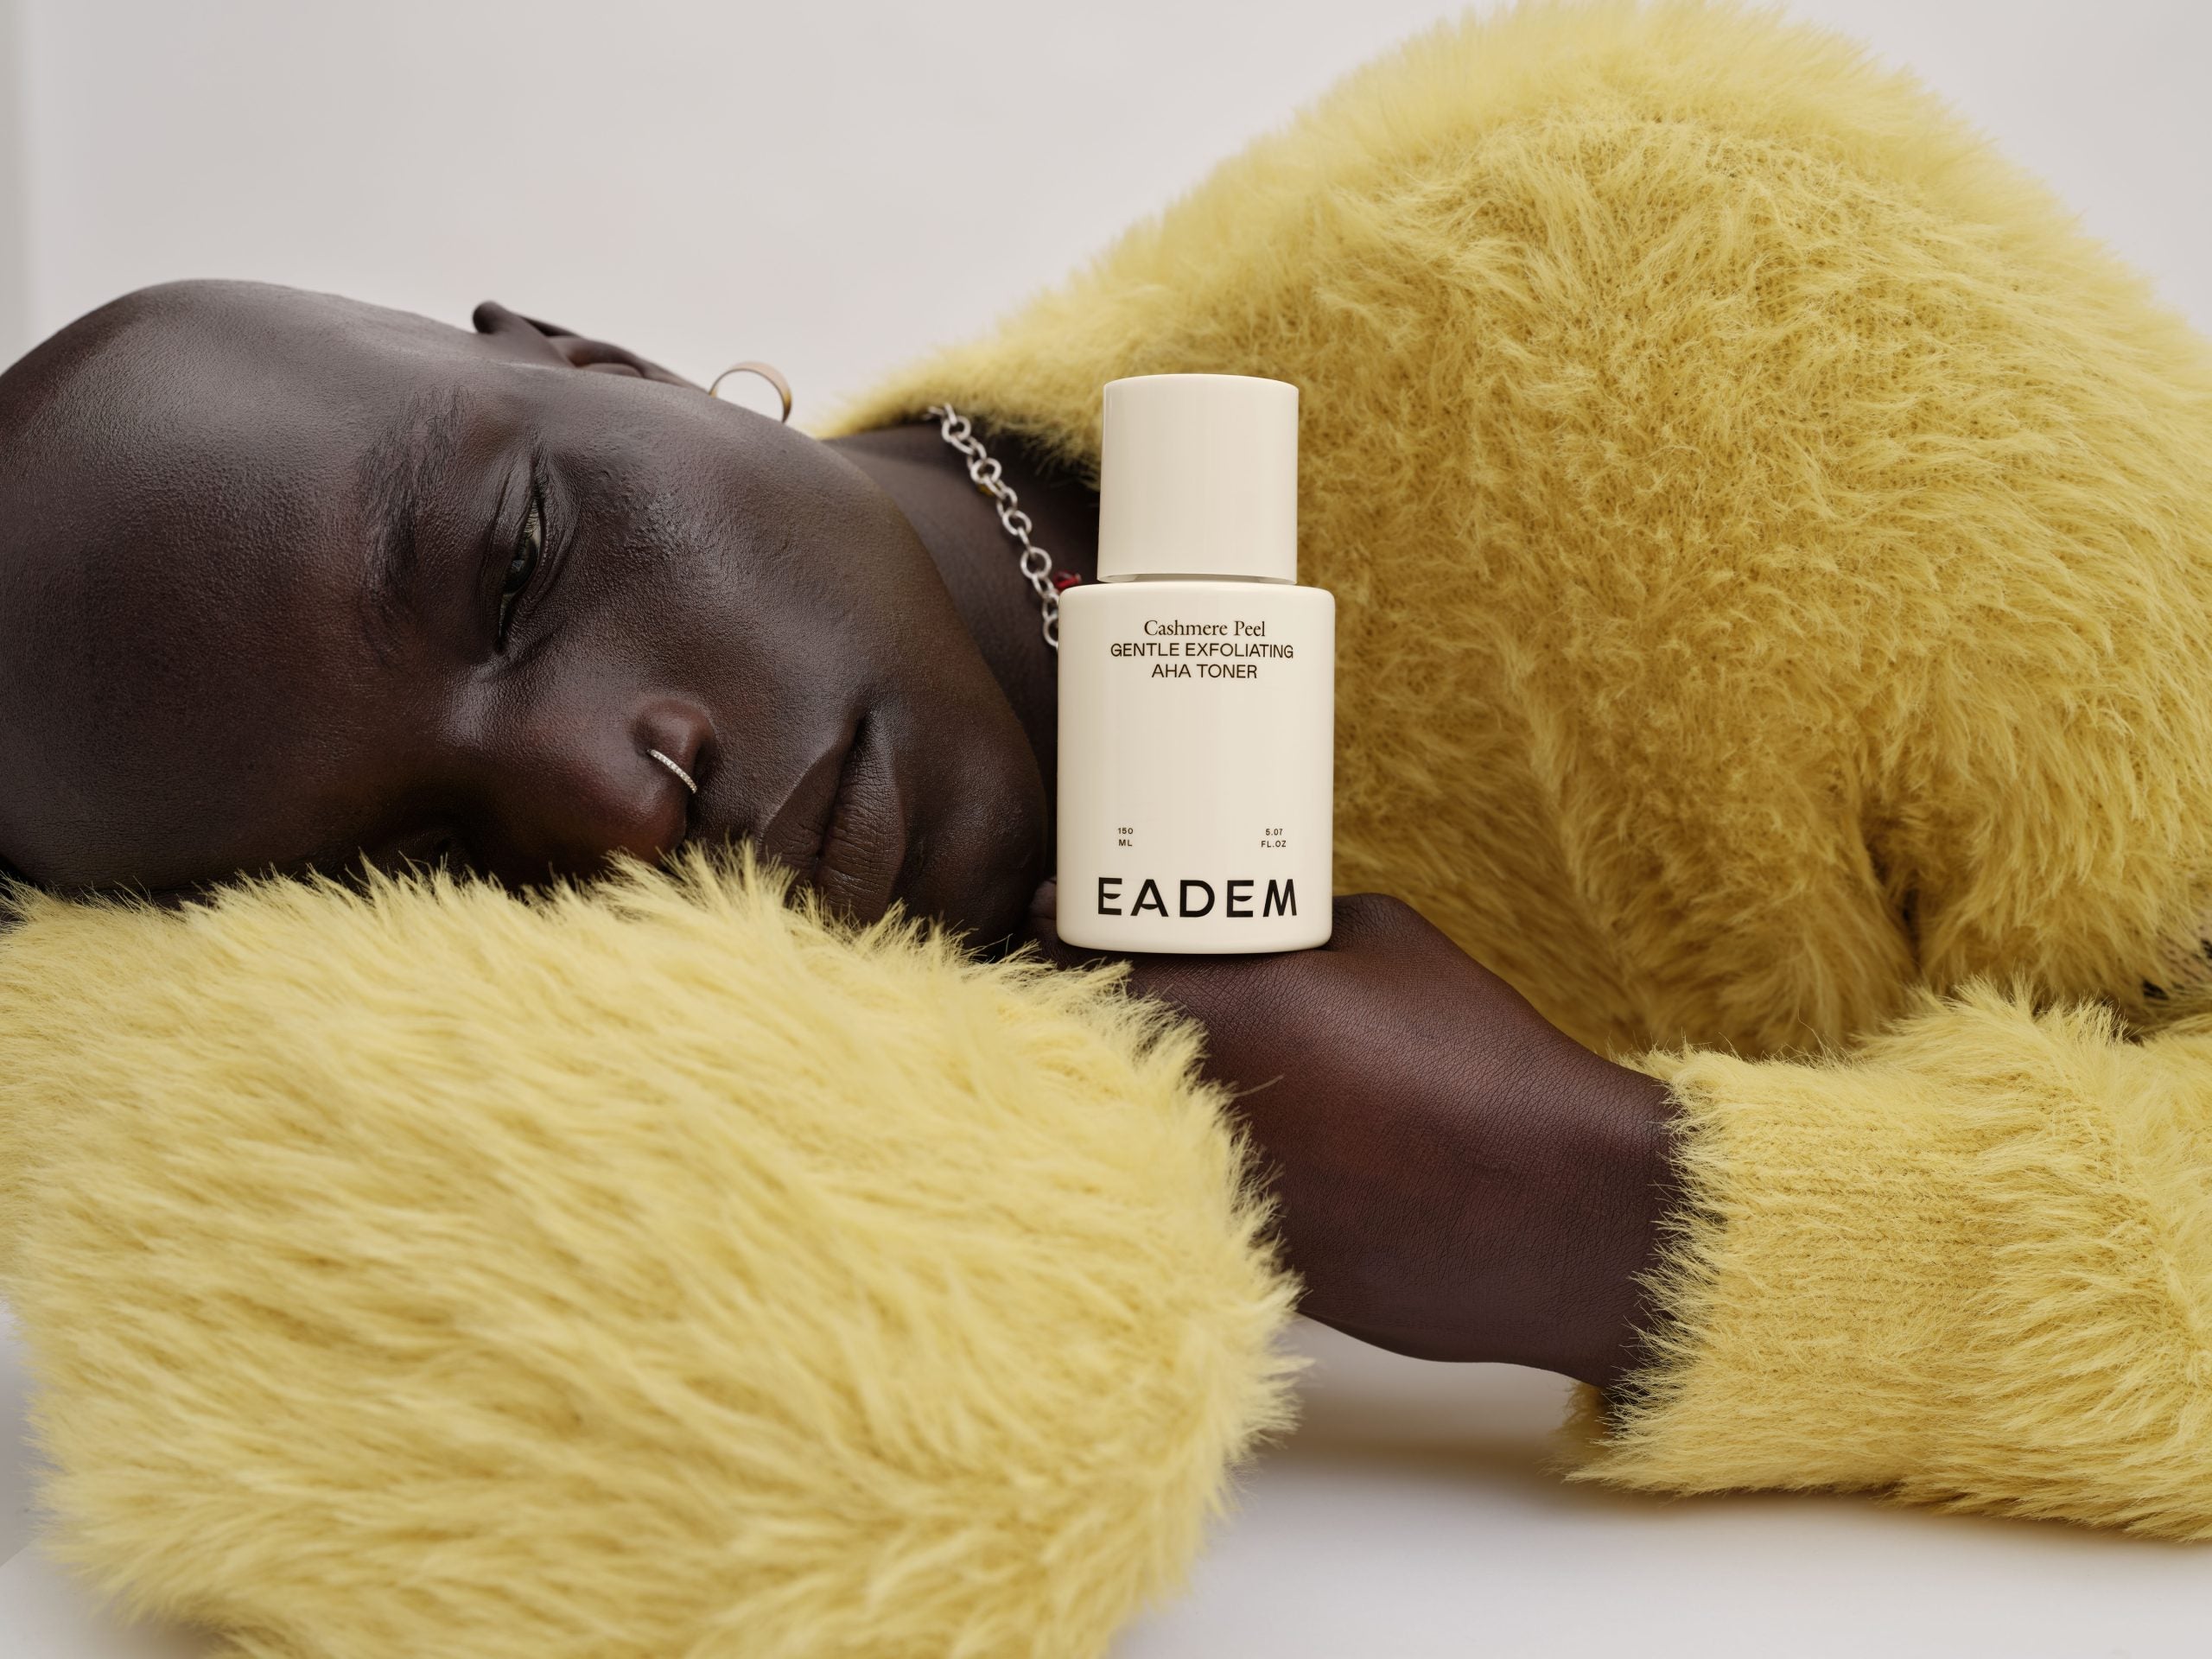 EADEM's New Cashmere Peel Does It All